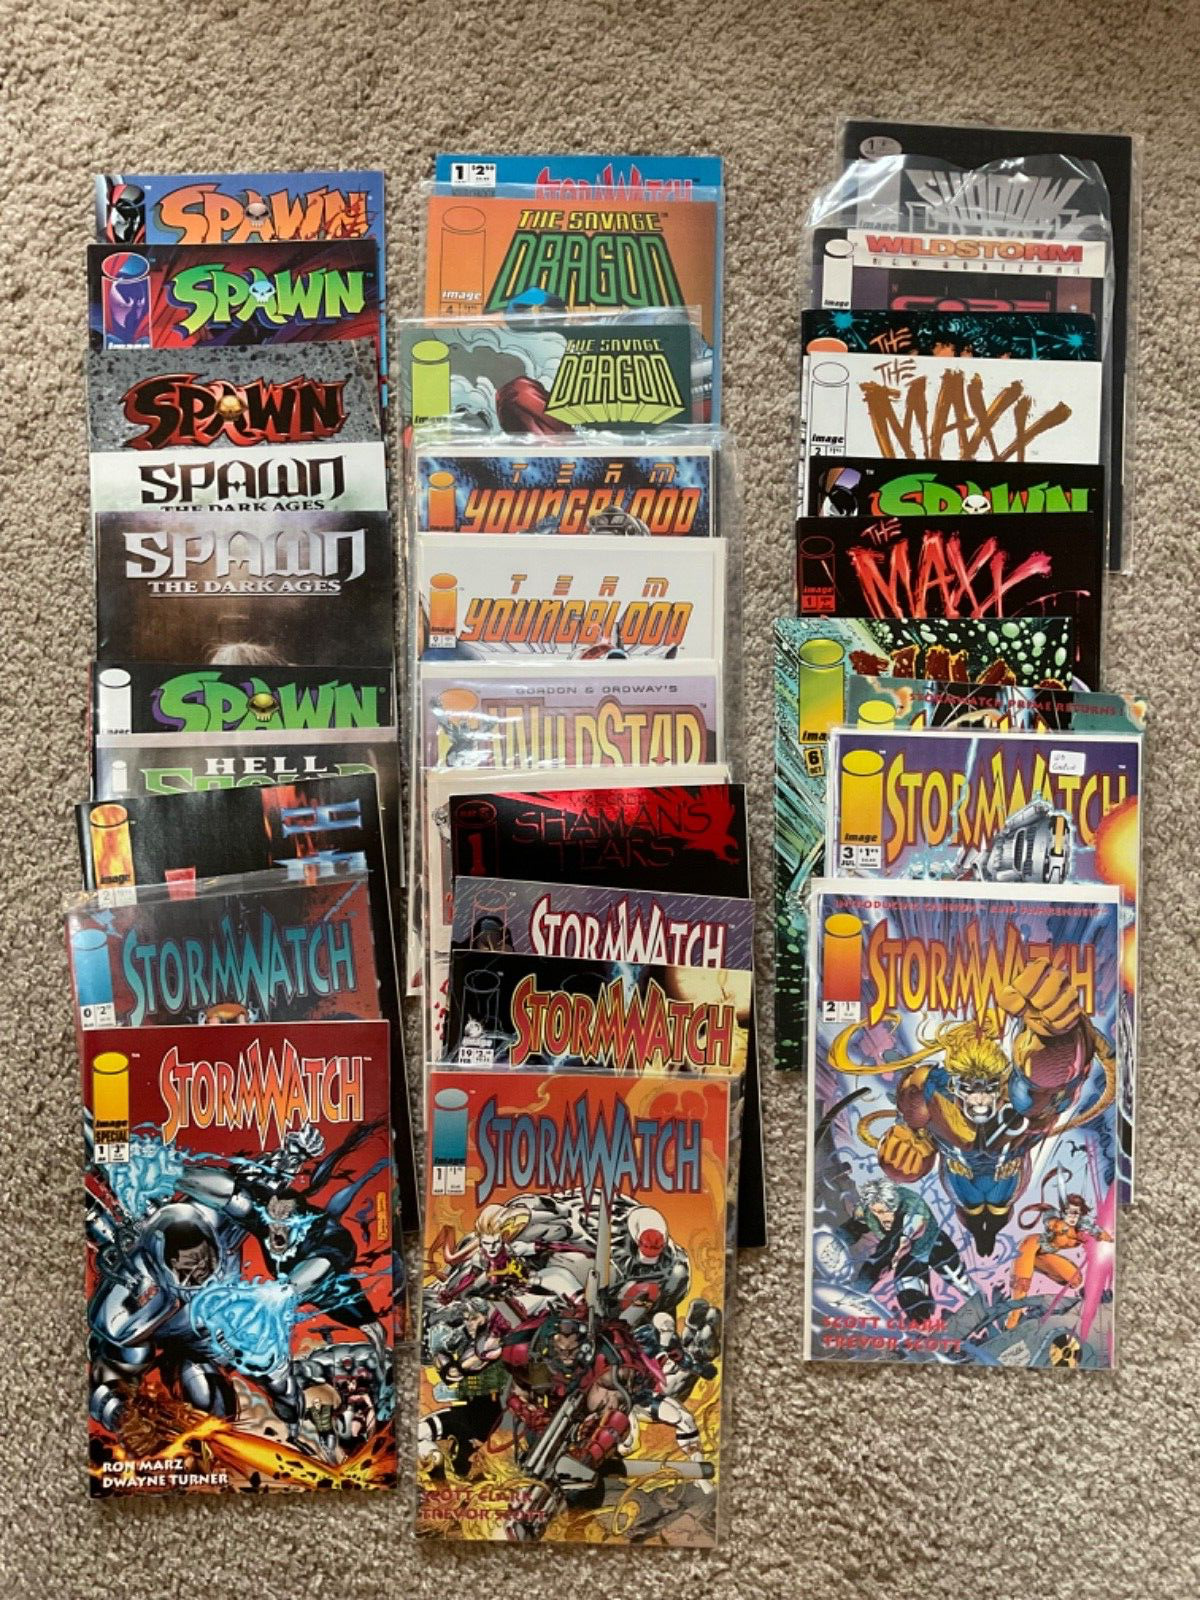 Lot of 33 Image Comics Books Spawn Maxx Stormwatch & More 